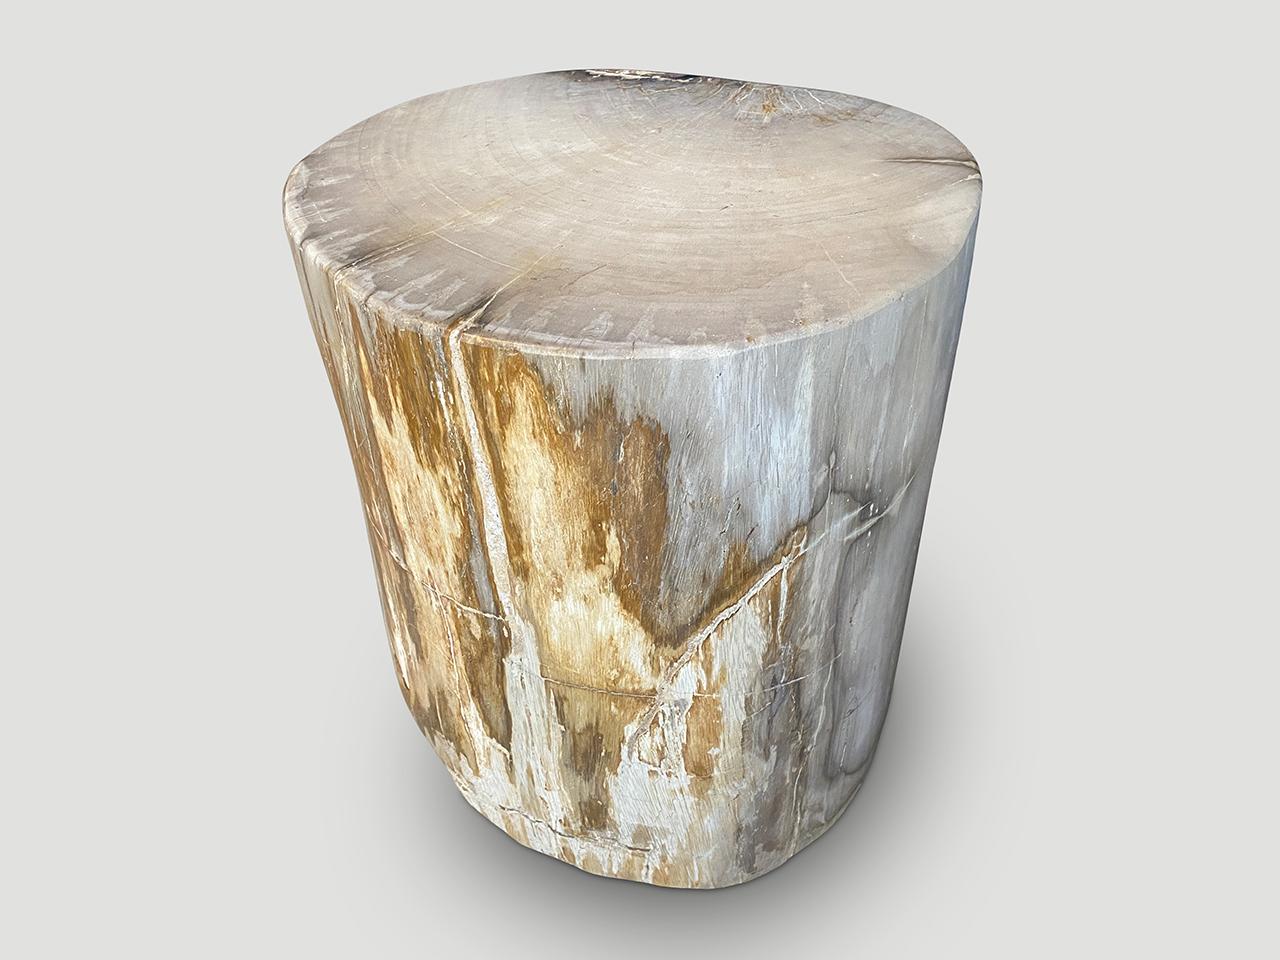 High quality petrified wood side table in beautiful grey tones and contrasting markings. Such a great combination. It’s fascinating how Mother Nature produces these exquisite 40 million year old petrified teak logs with such contrasting colors and